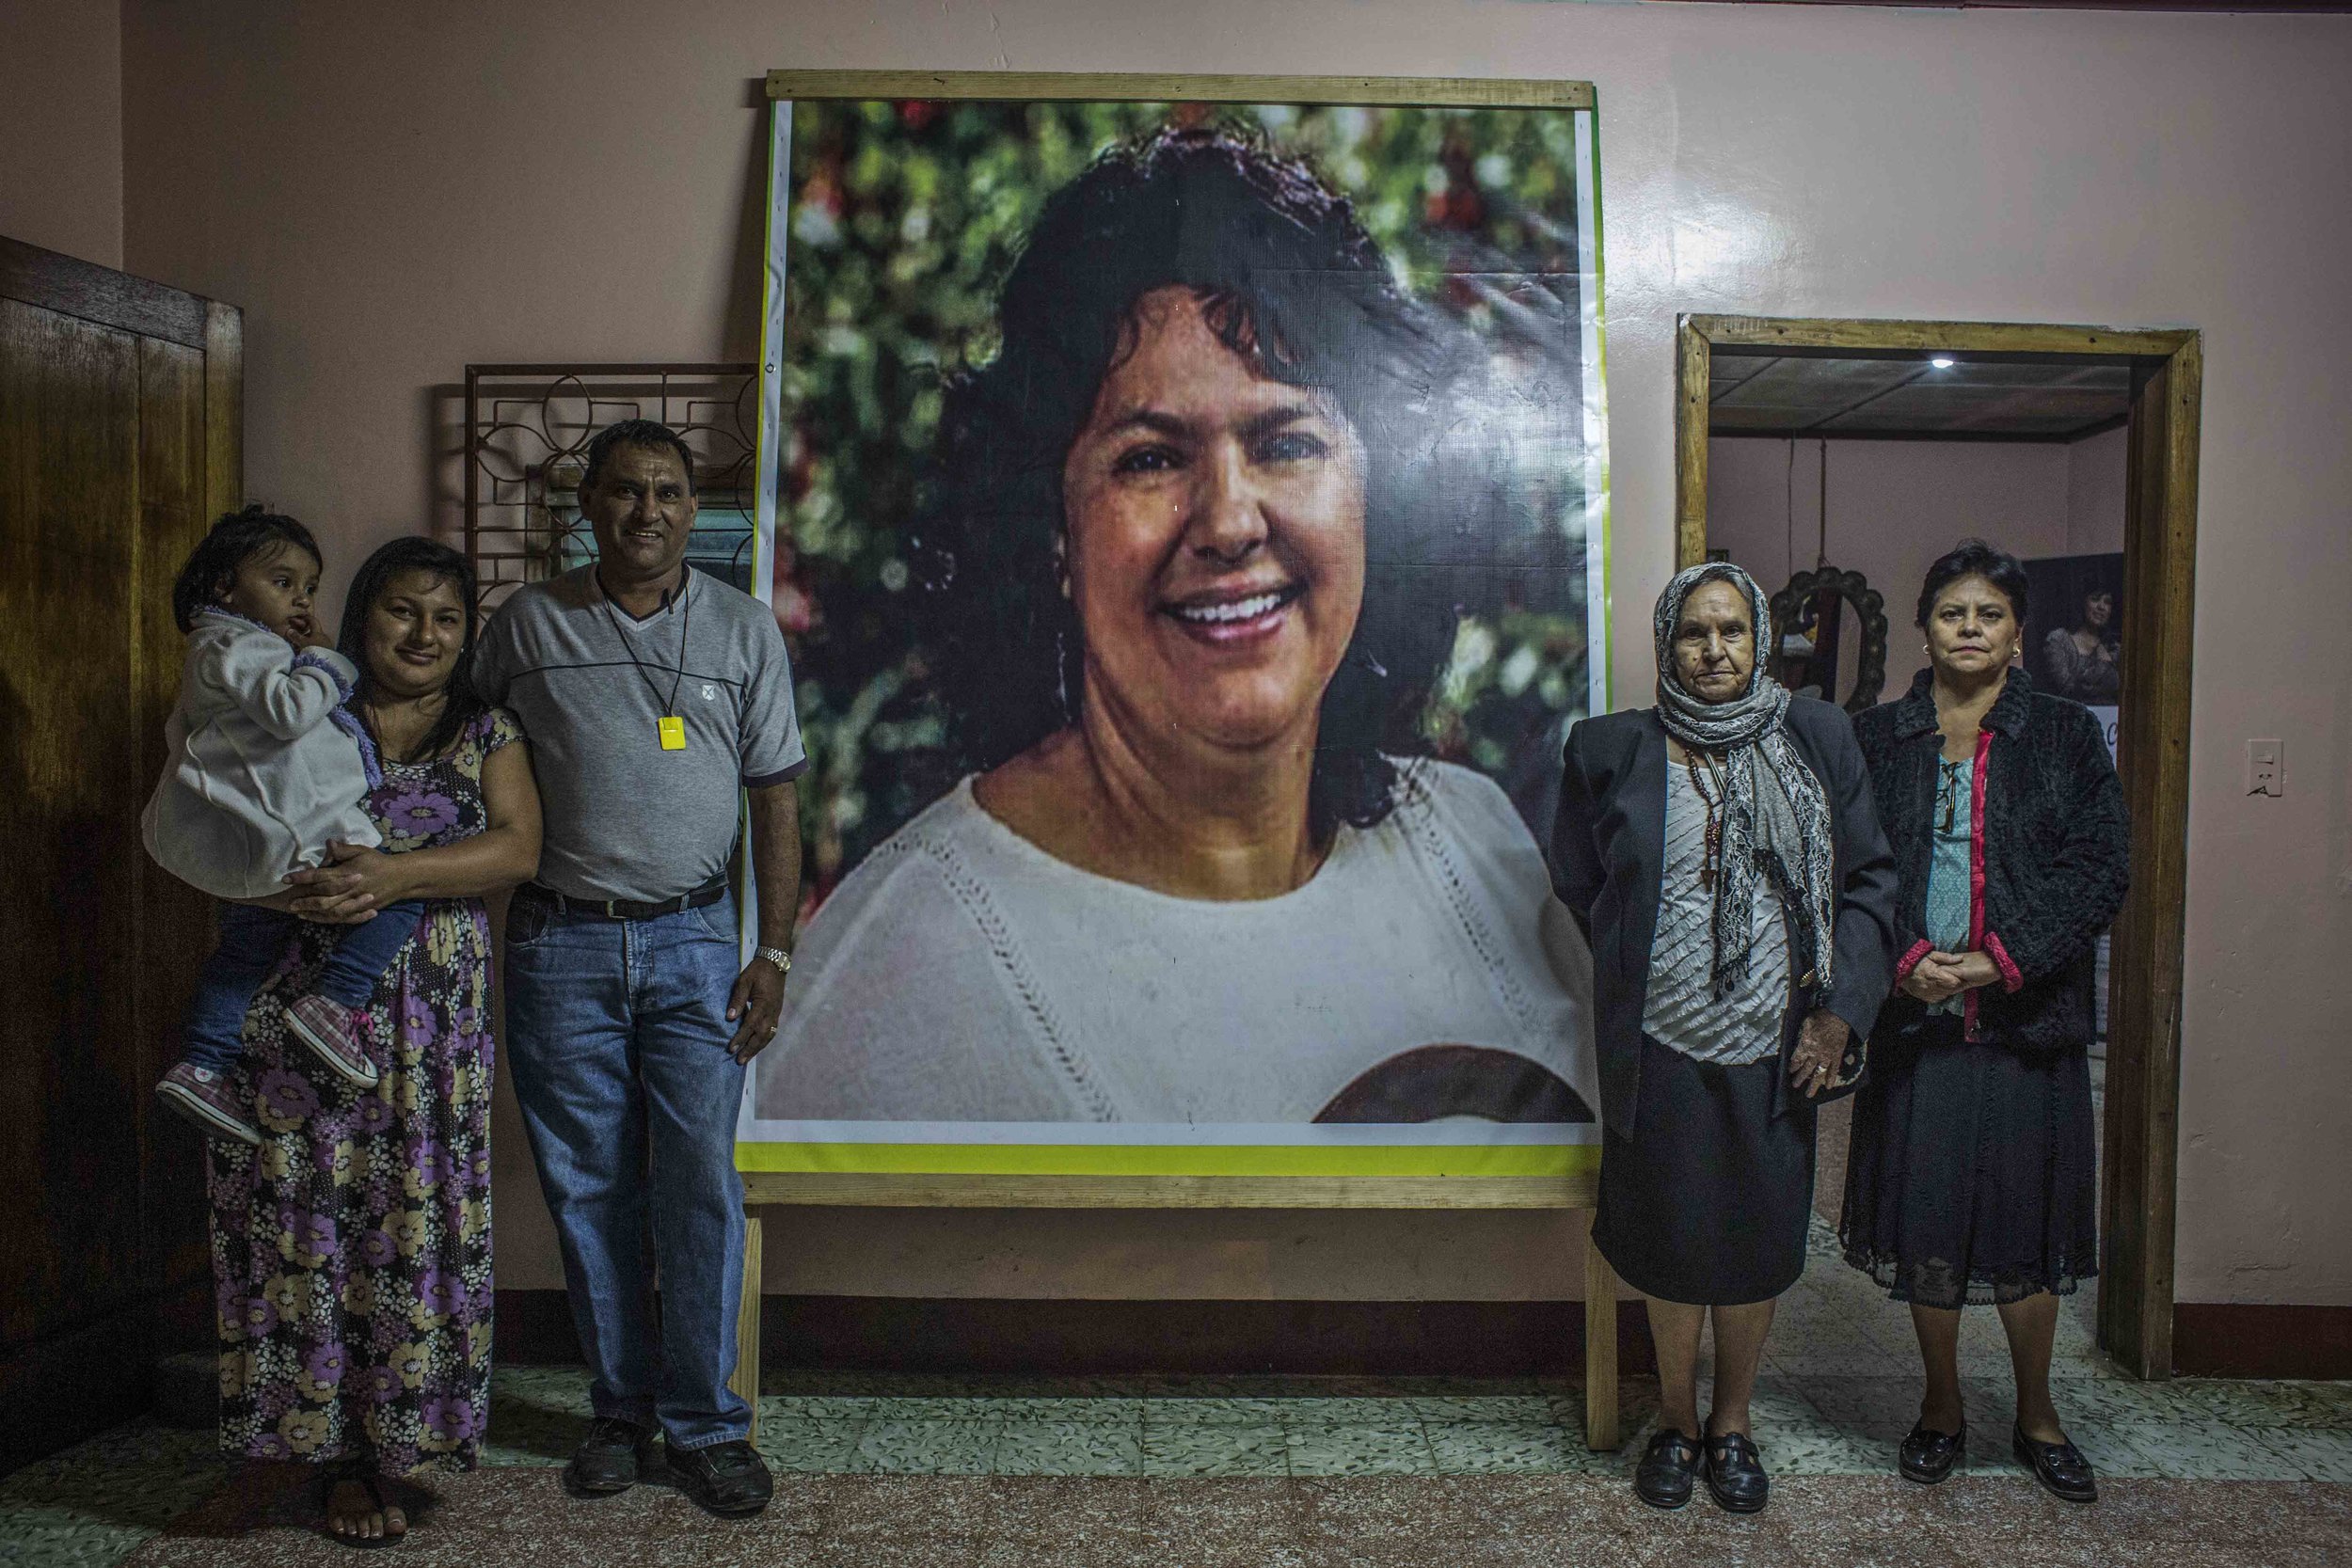  The family of Berta Caceres, mother's sister and brother-in-law with her daughter, posing next to poster of Berta , affixed at the entrance of the family home, in the city of La Esperanza, Honduras. 